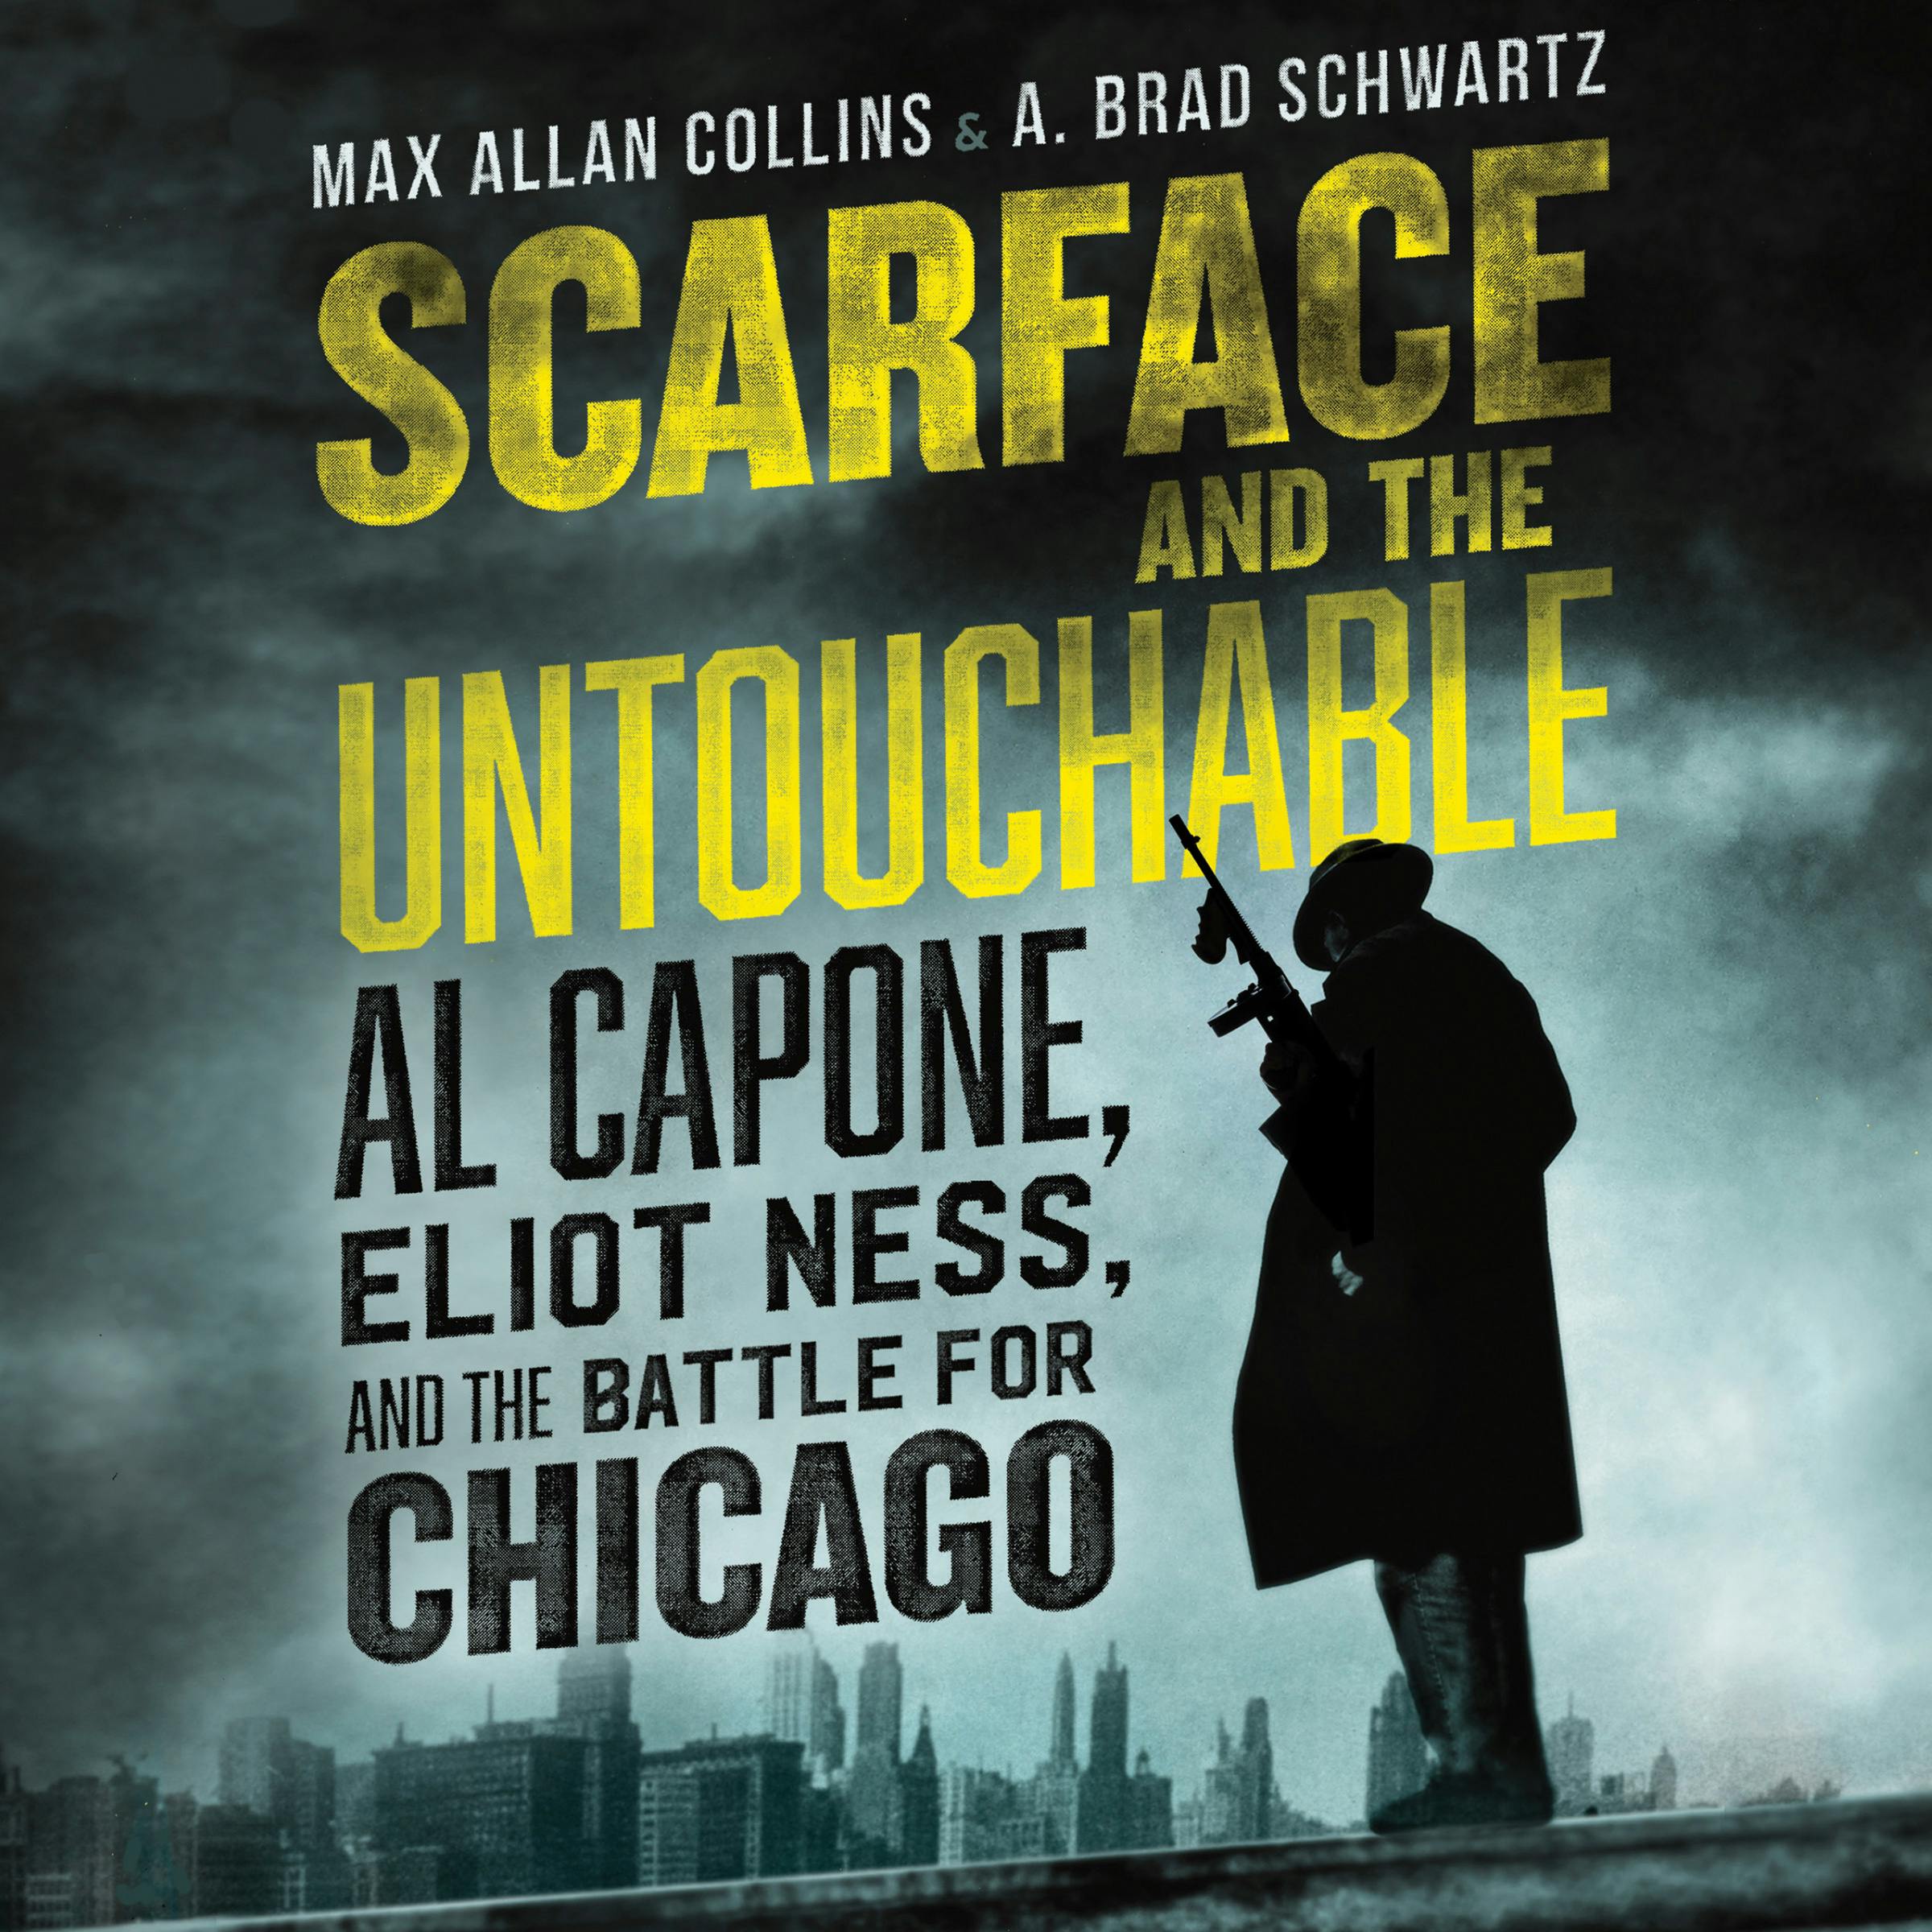 Scarface and the Untouchable: Al Capone, Eliot Ness, and the Battle for Chicago - A. Brad Schwartz, Max Allan Collins